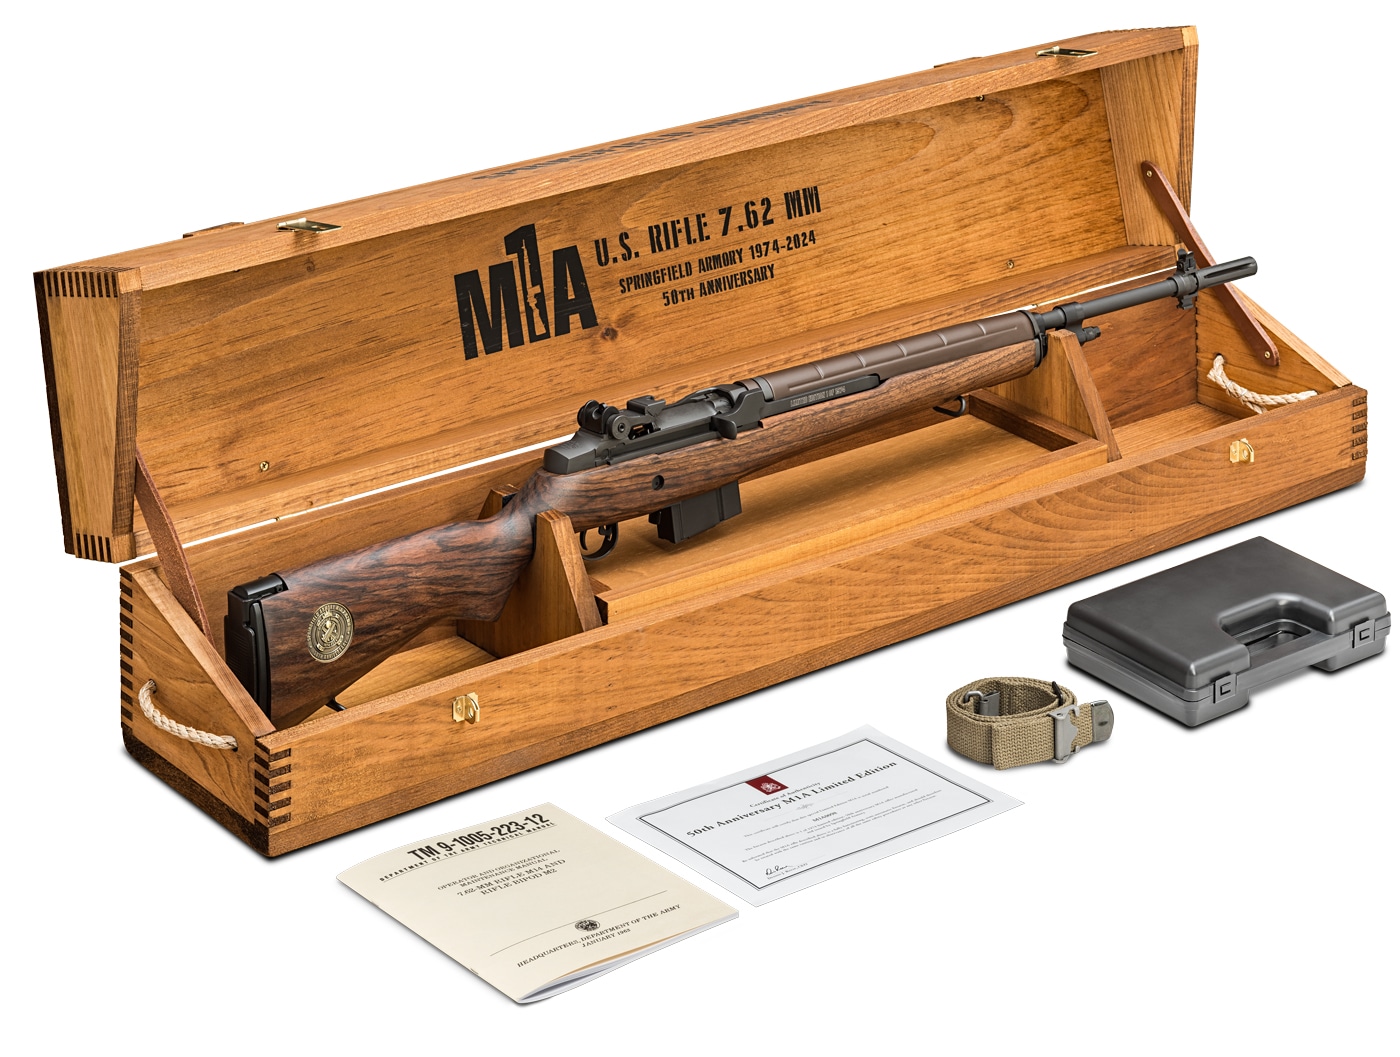 Limited Special Edition 50th Anniversary Springfield Armory M1A rifle case and accessories